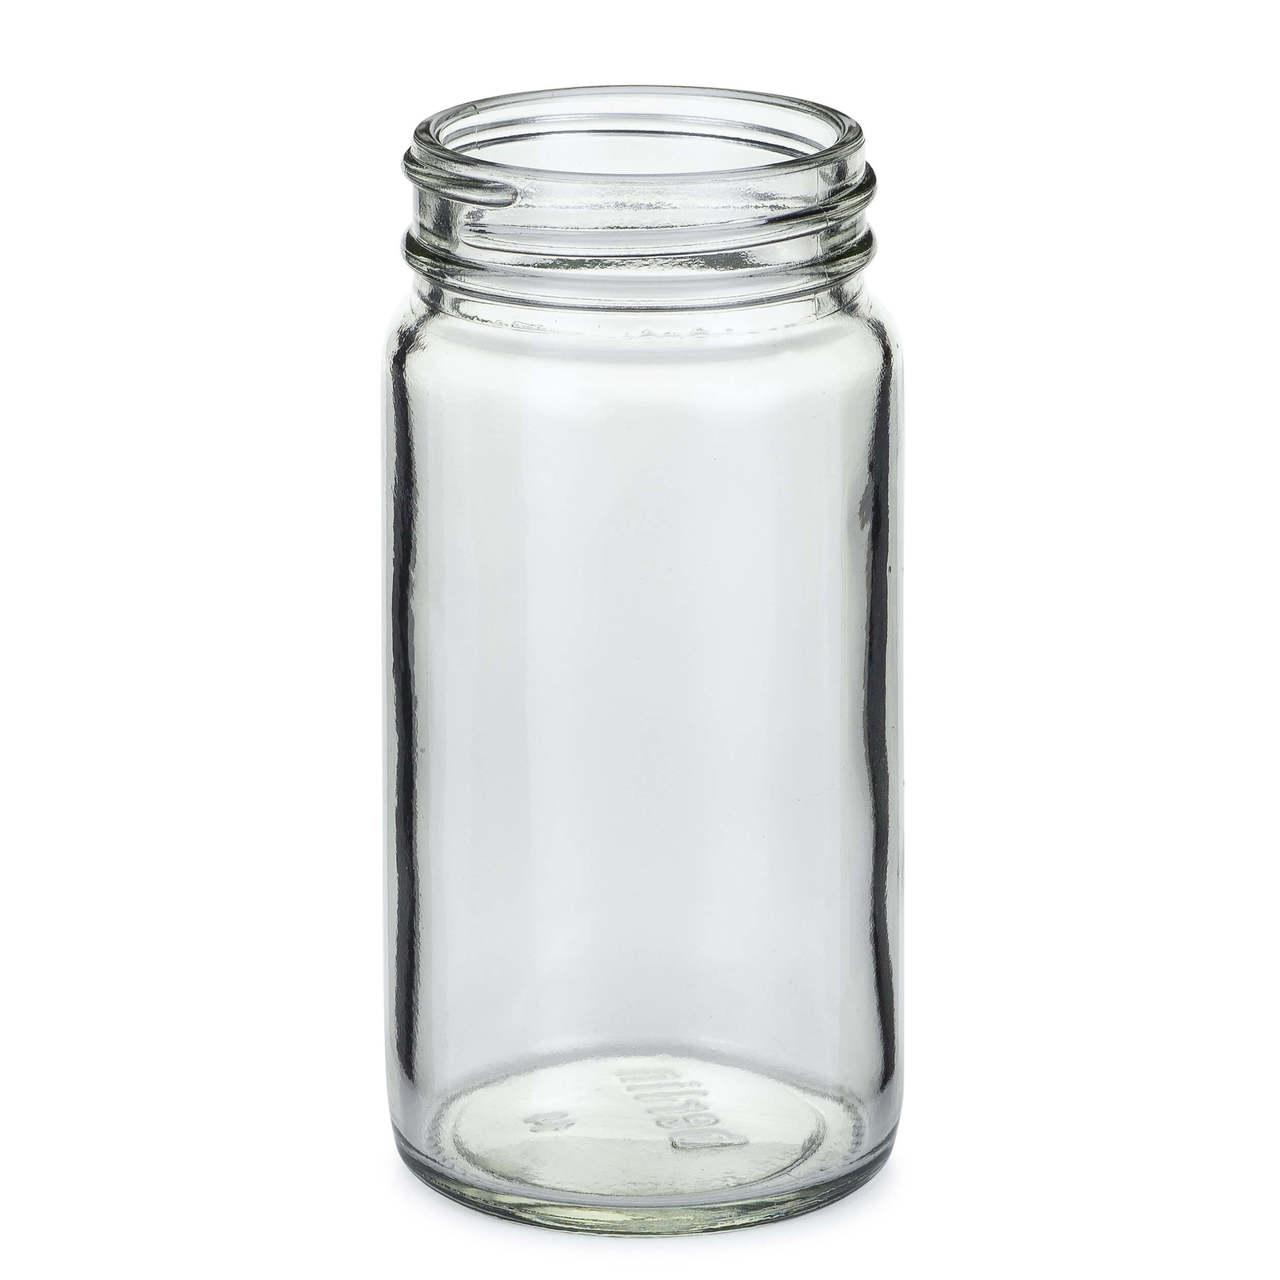 4 oz Clear PET Spice Bottles w/ Red Unlined Caps and Sifter Fitments